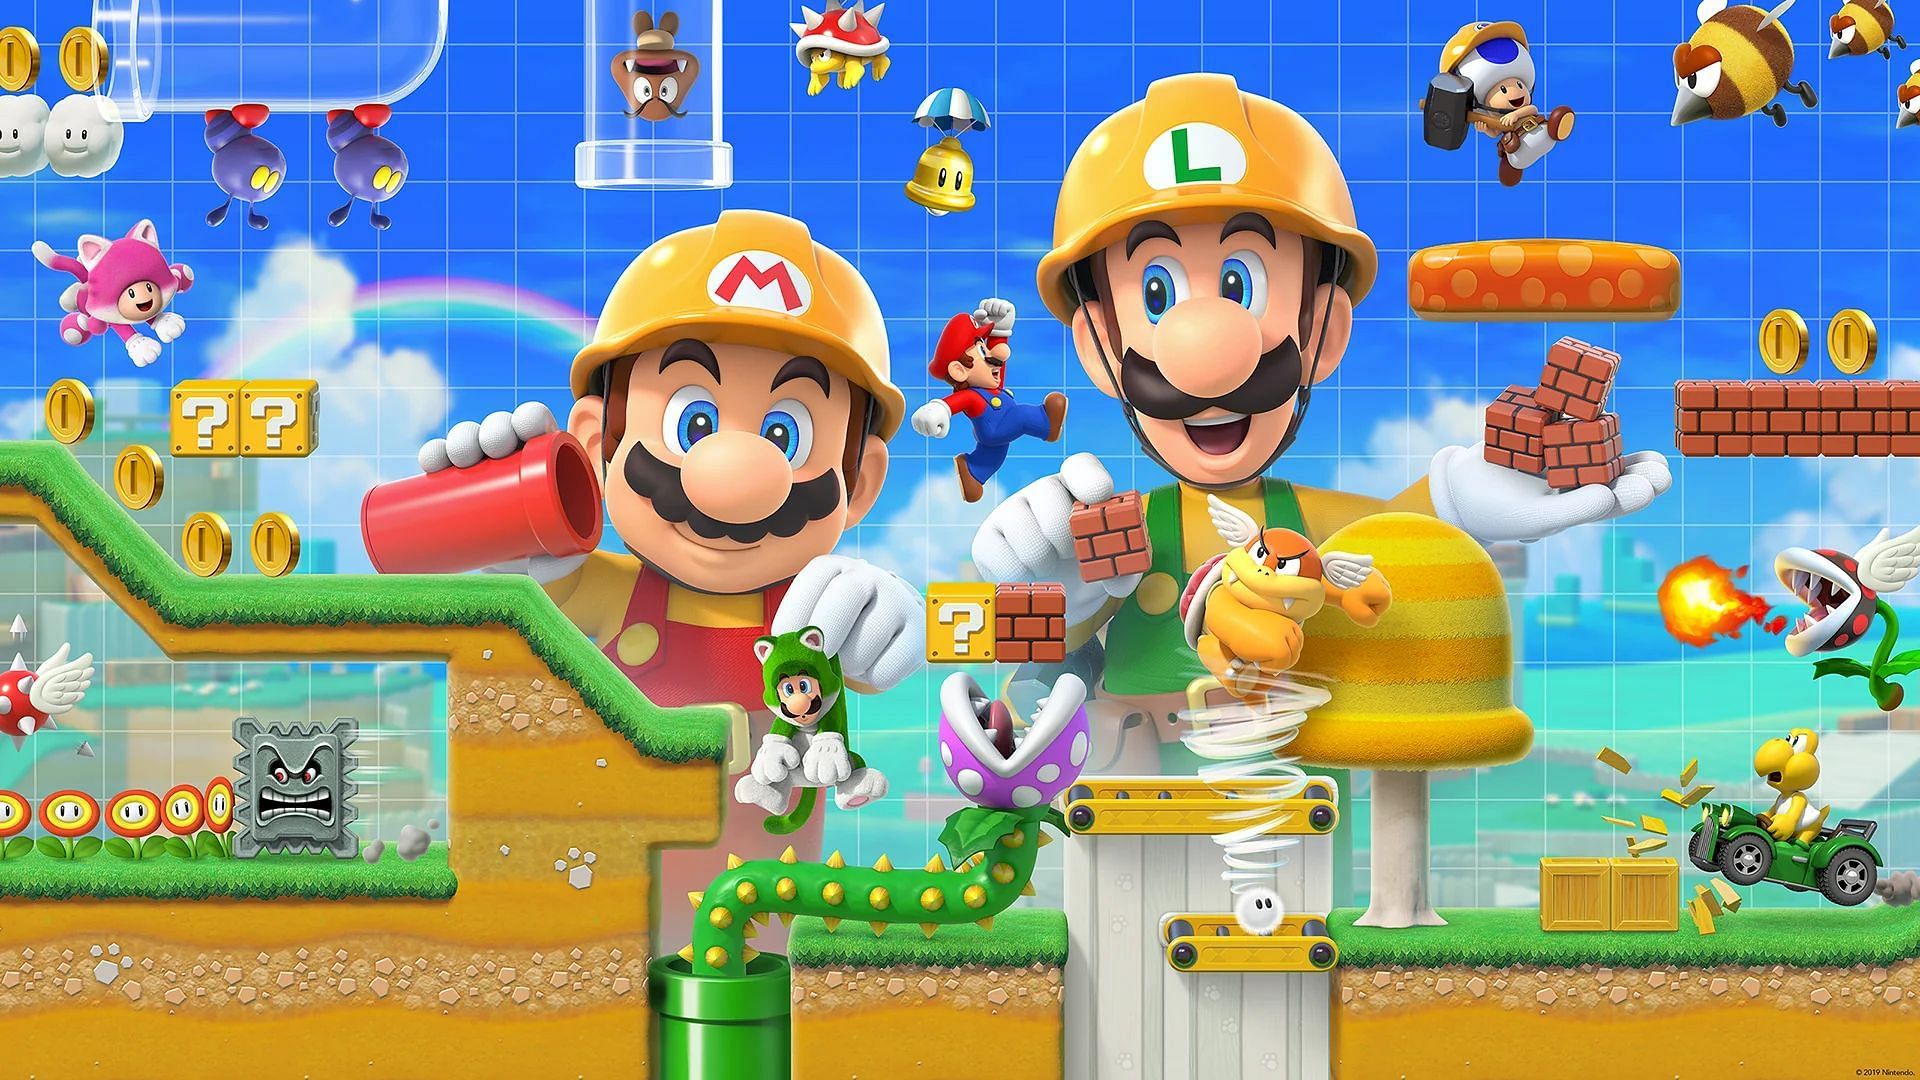 Have you ever wanted to create your own Mario levels? (Image via Nintendo)